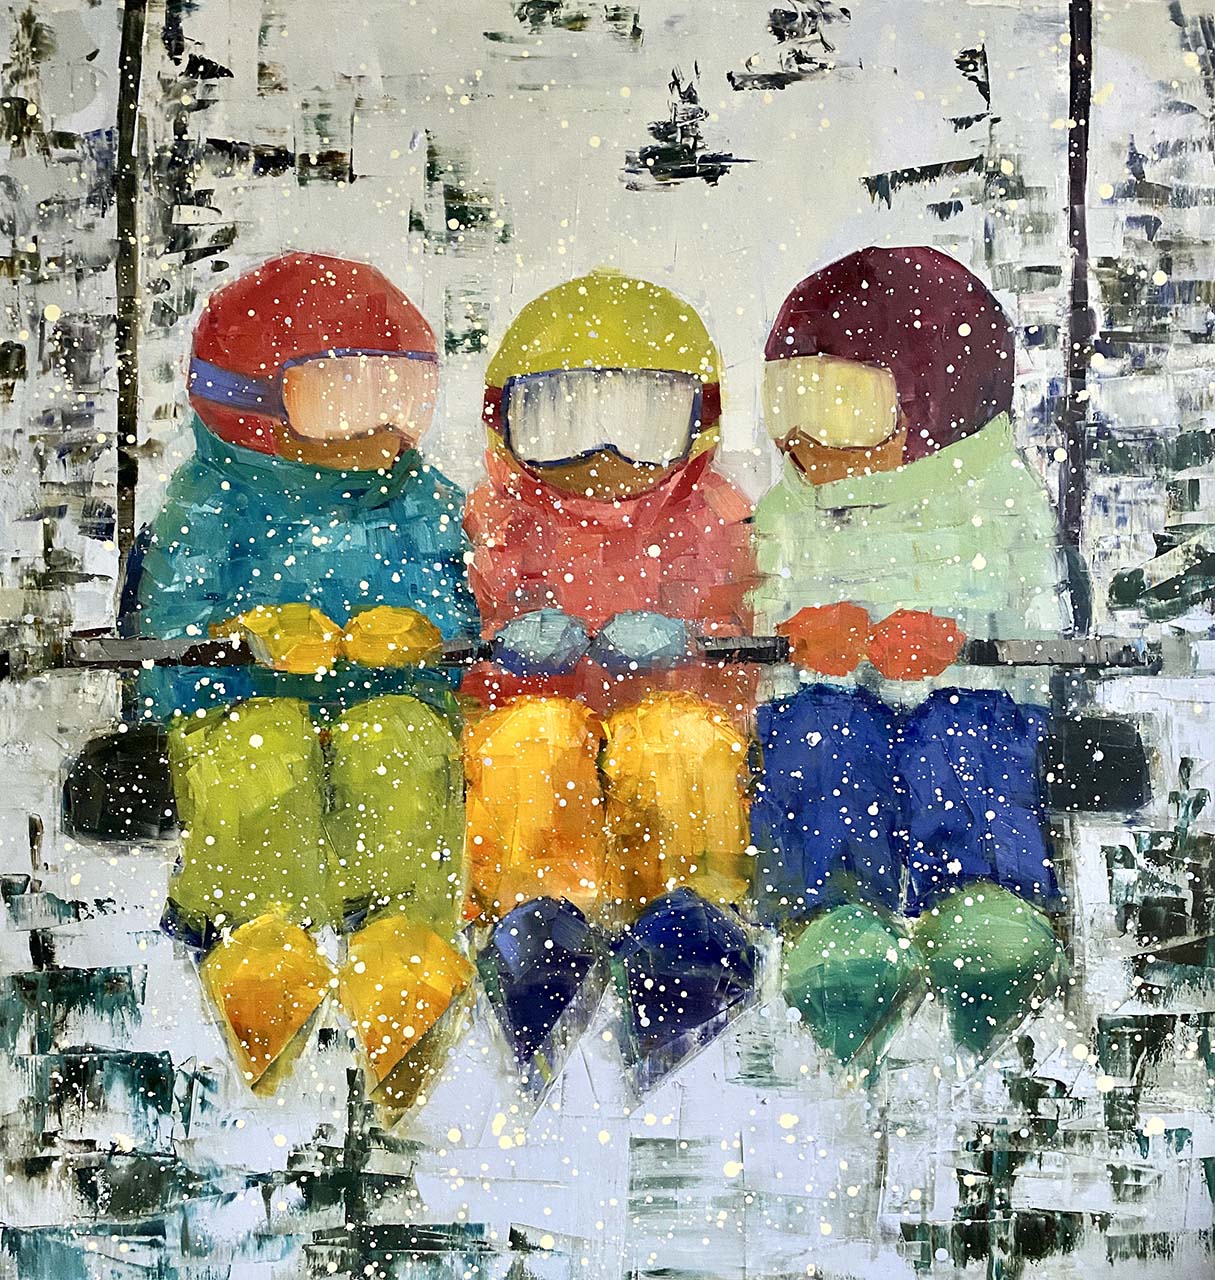 Chairlift (Snow Day) by Rebecca Kinkead